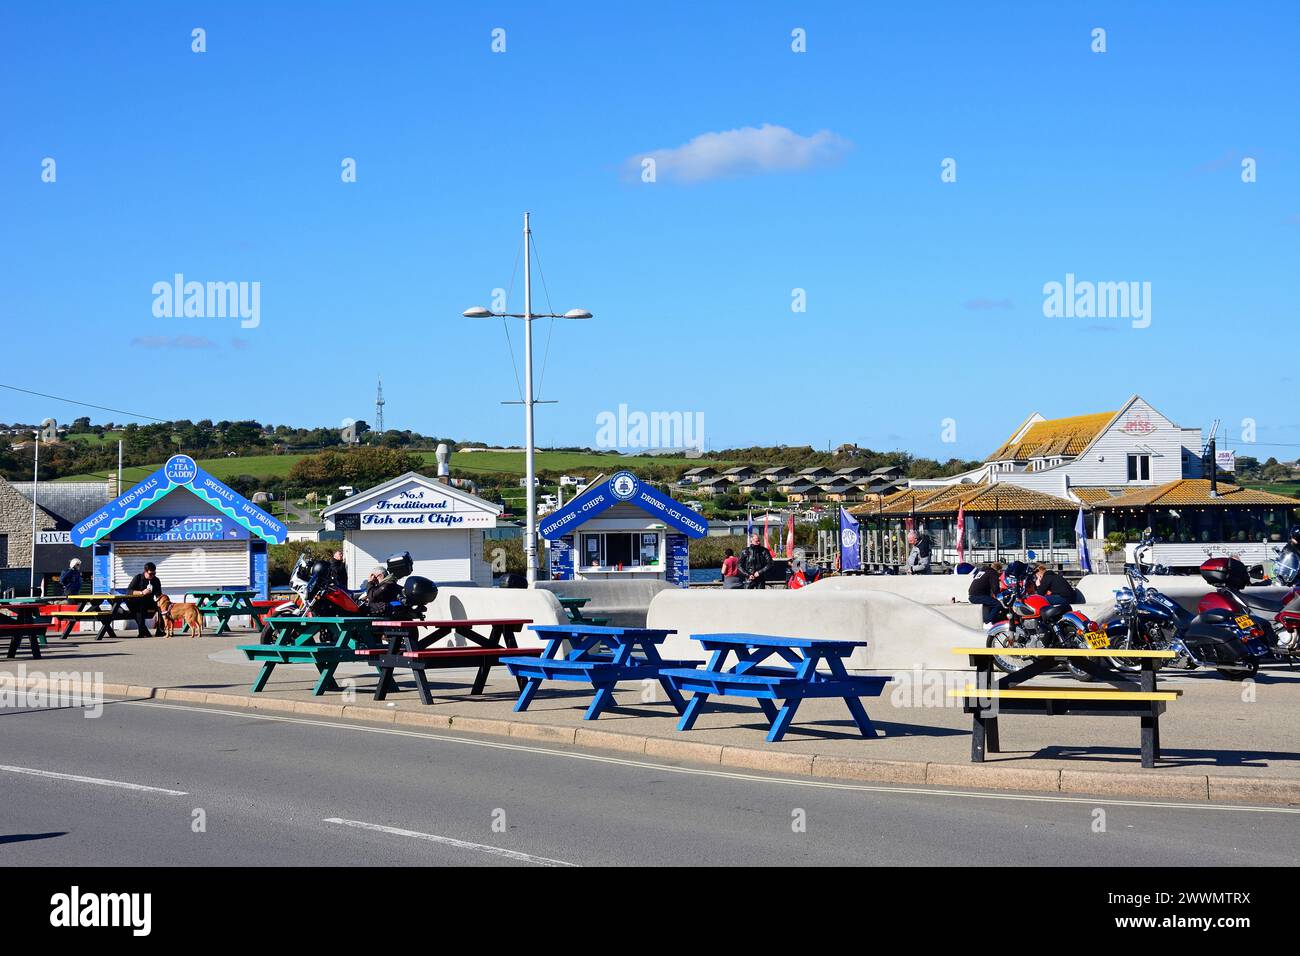 Bikers relaxing on the roadside with The Rise restaurant to the rear and snack kiosks to the left, West Bay, Dorset, UK, Europe. Stock Photo